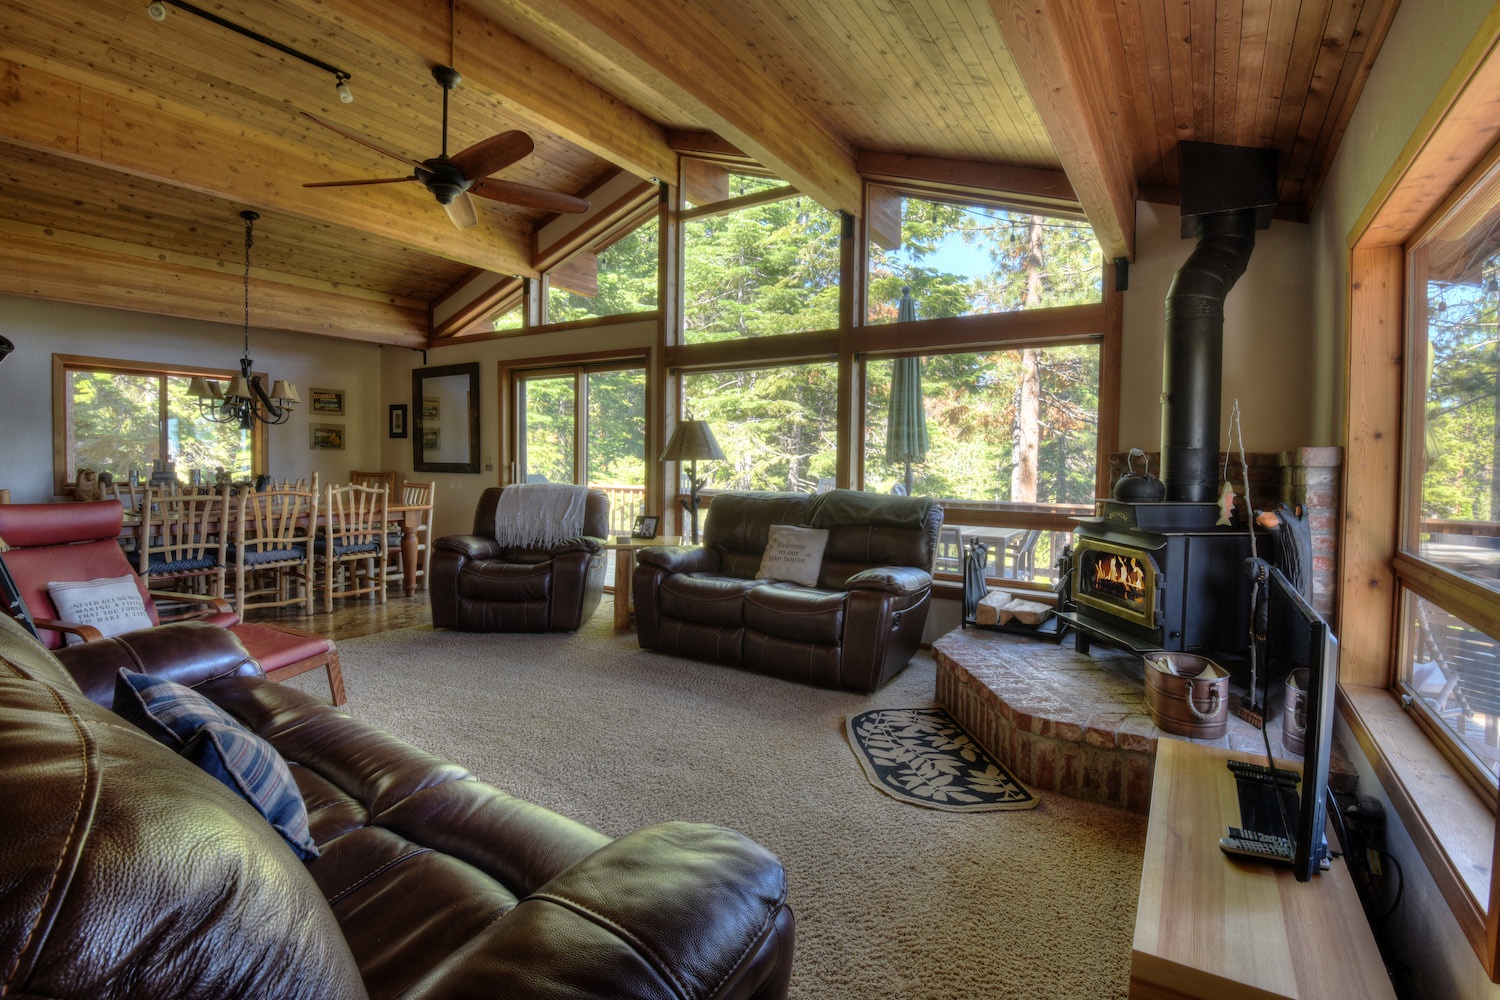 Living room with floor to ceiling windows and wood fireplace